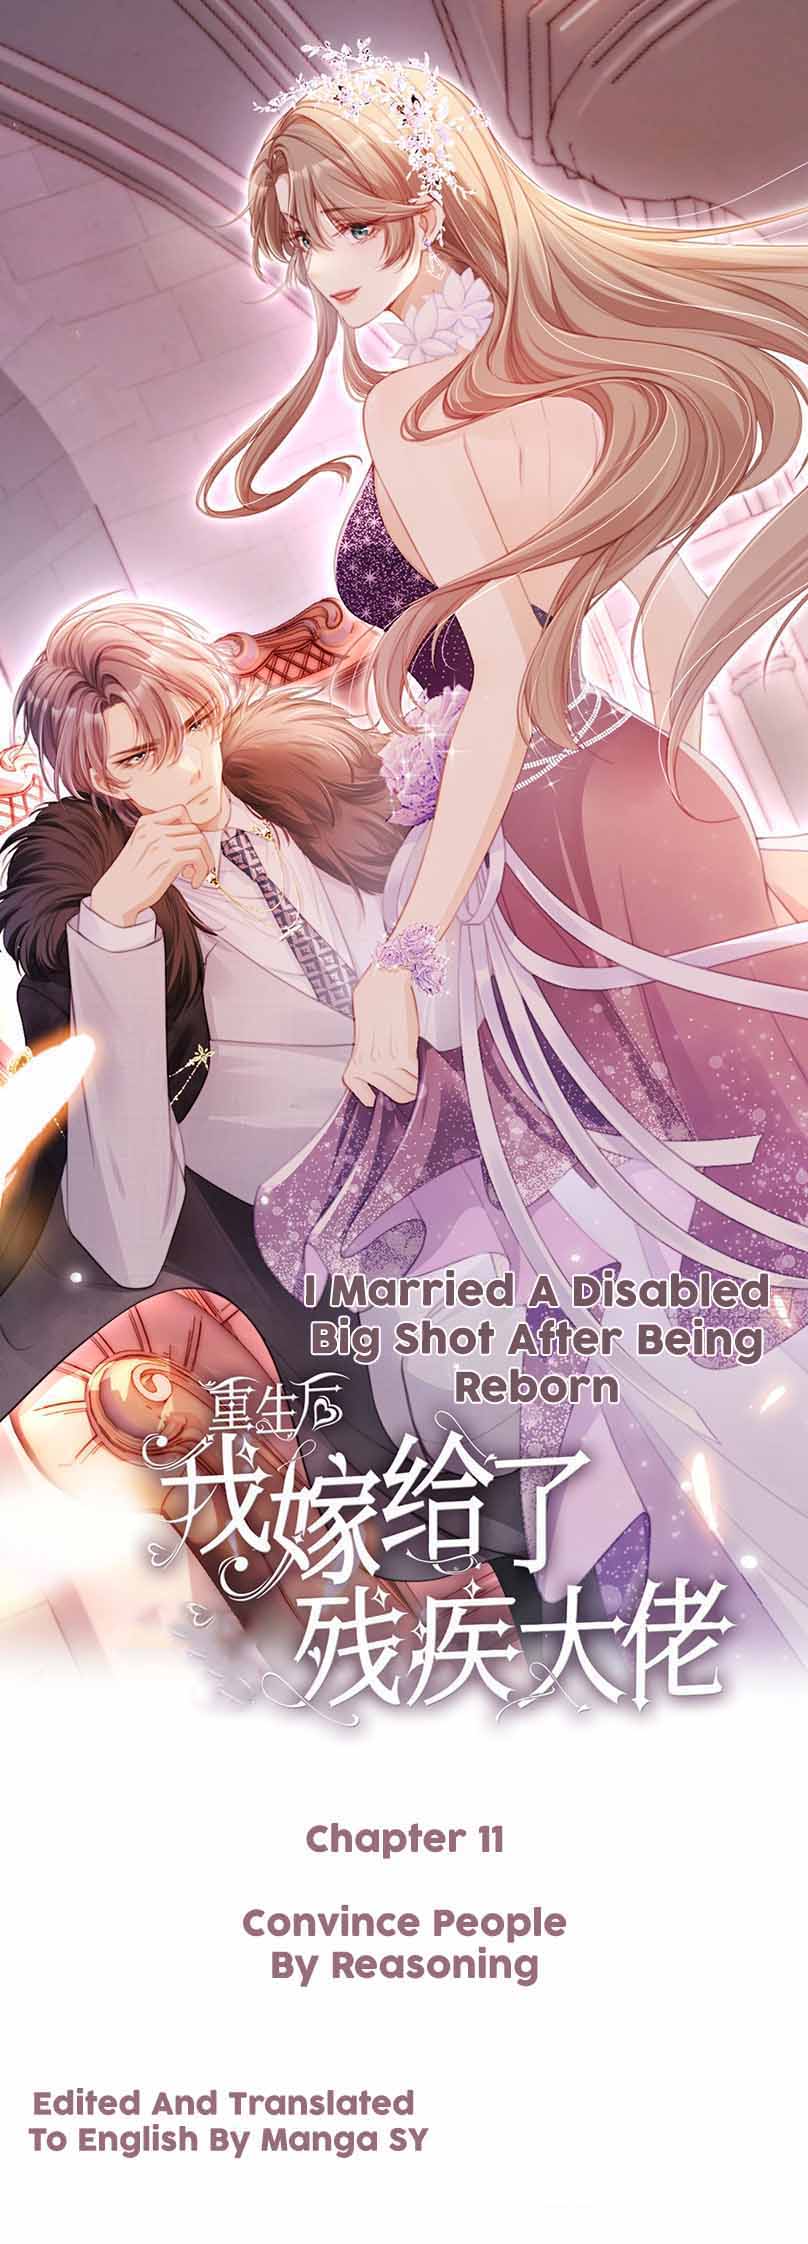 Reborn To Marry A Disabled Fiance [ Danmei MTL ] - 11%